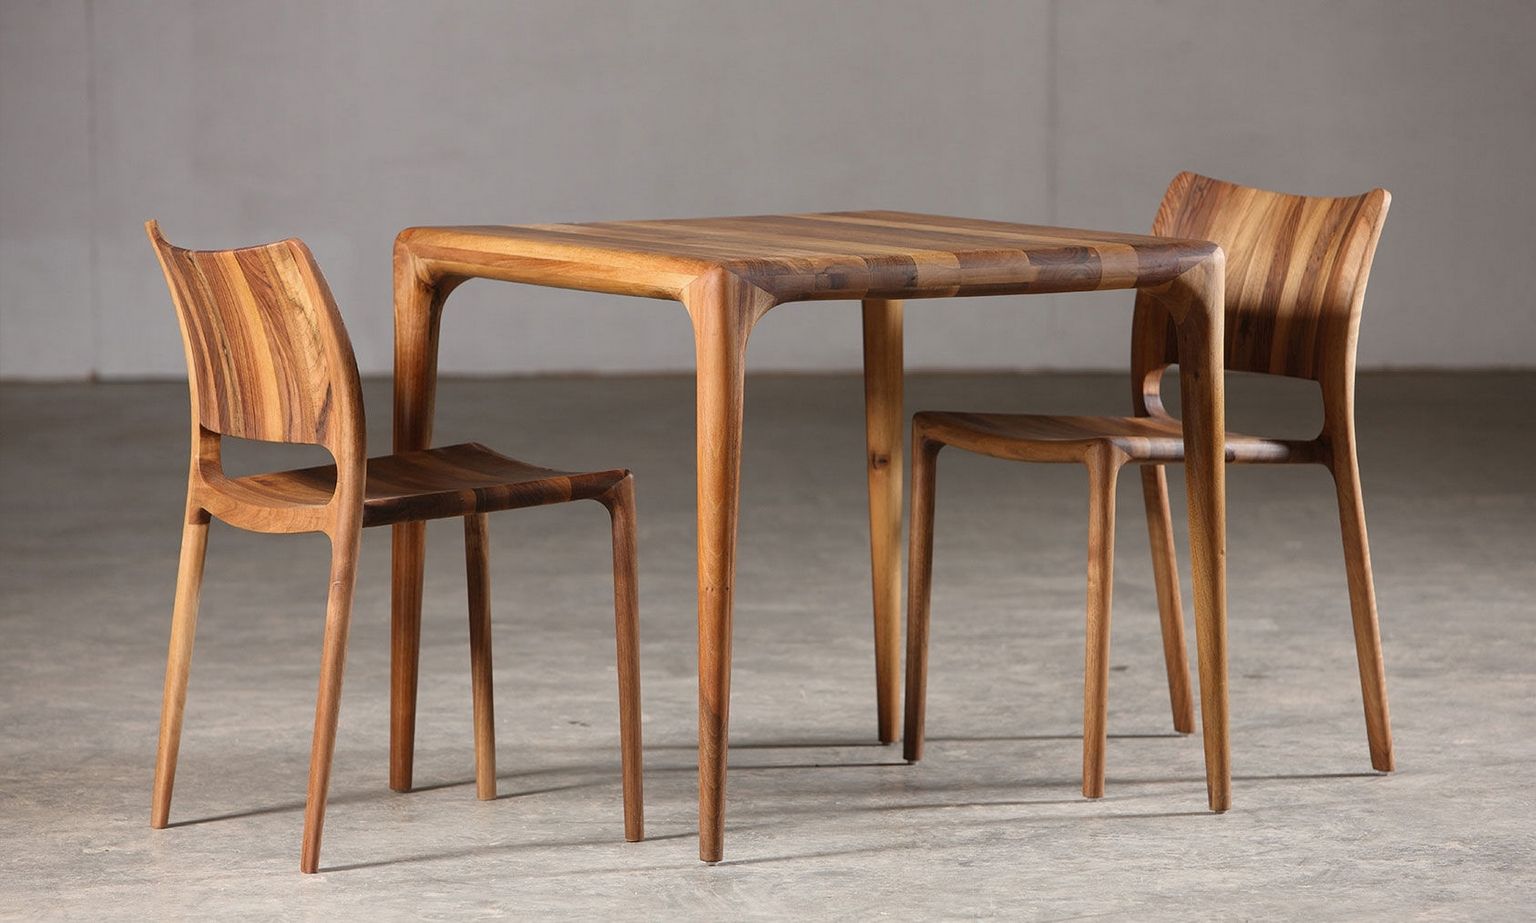 Solid Wood Furniture For Eco-friendly Homes